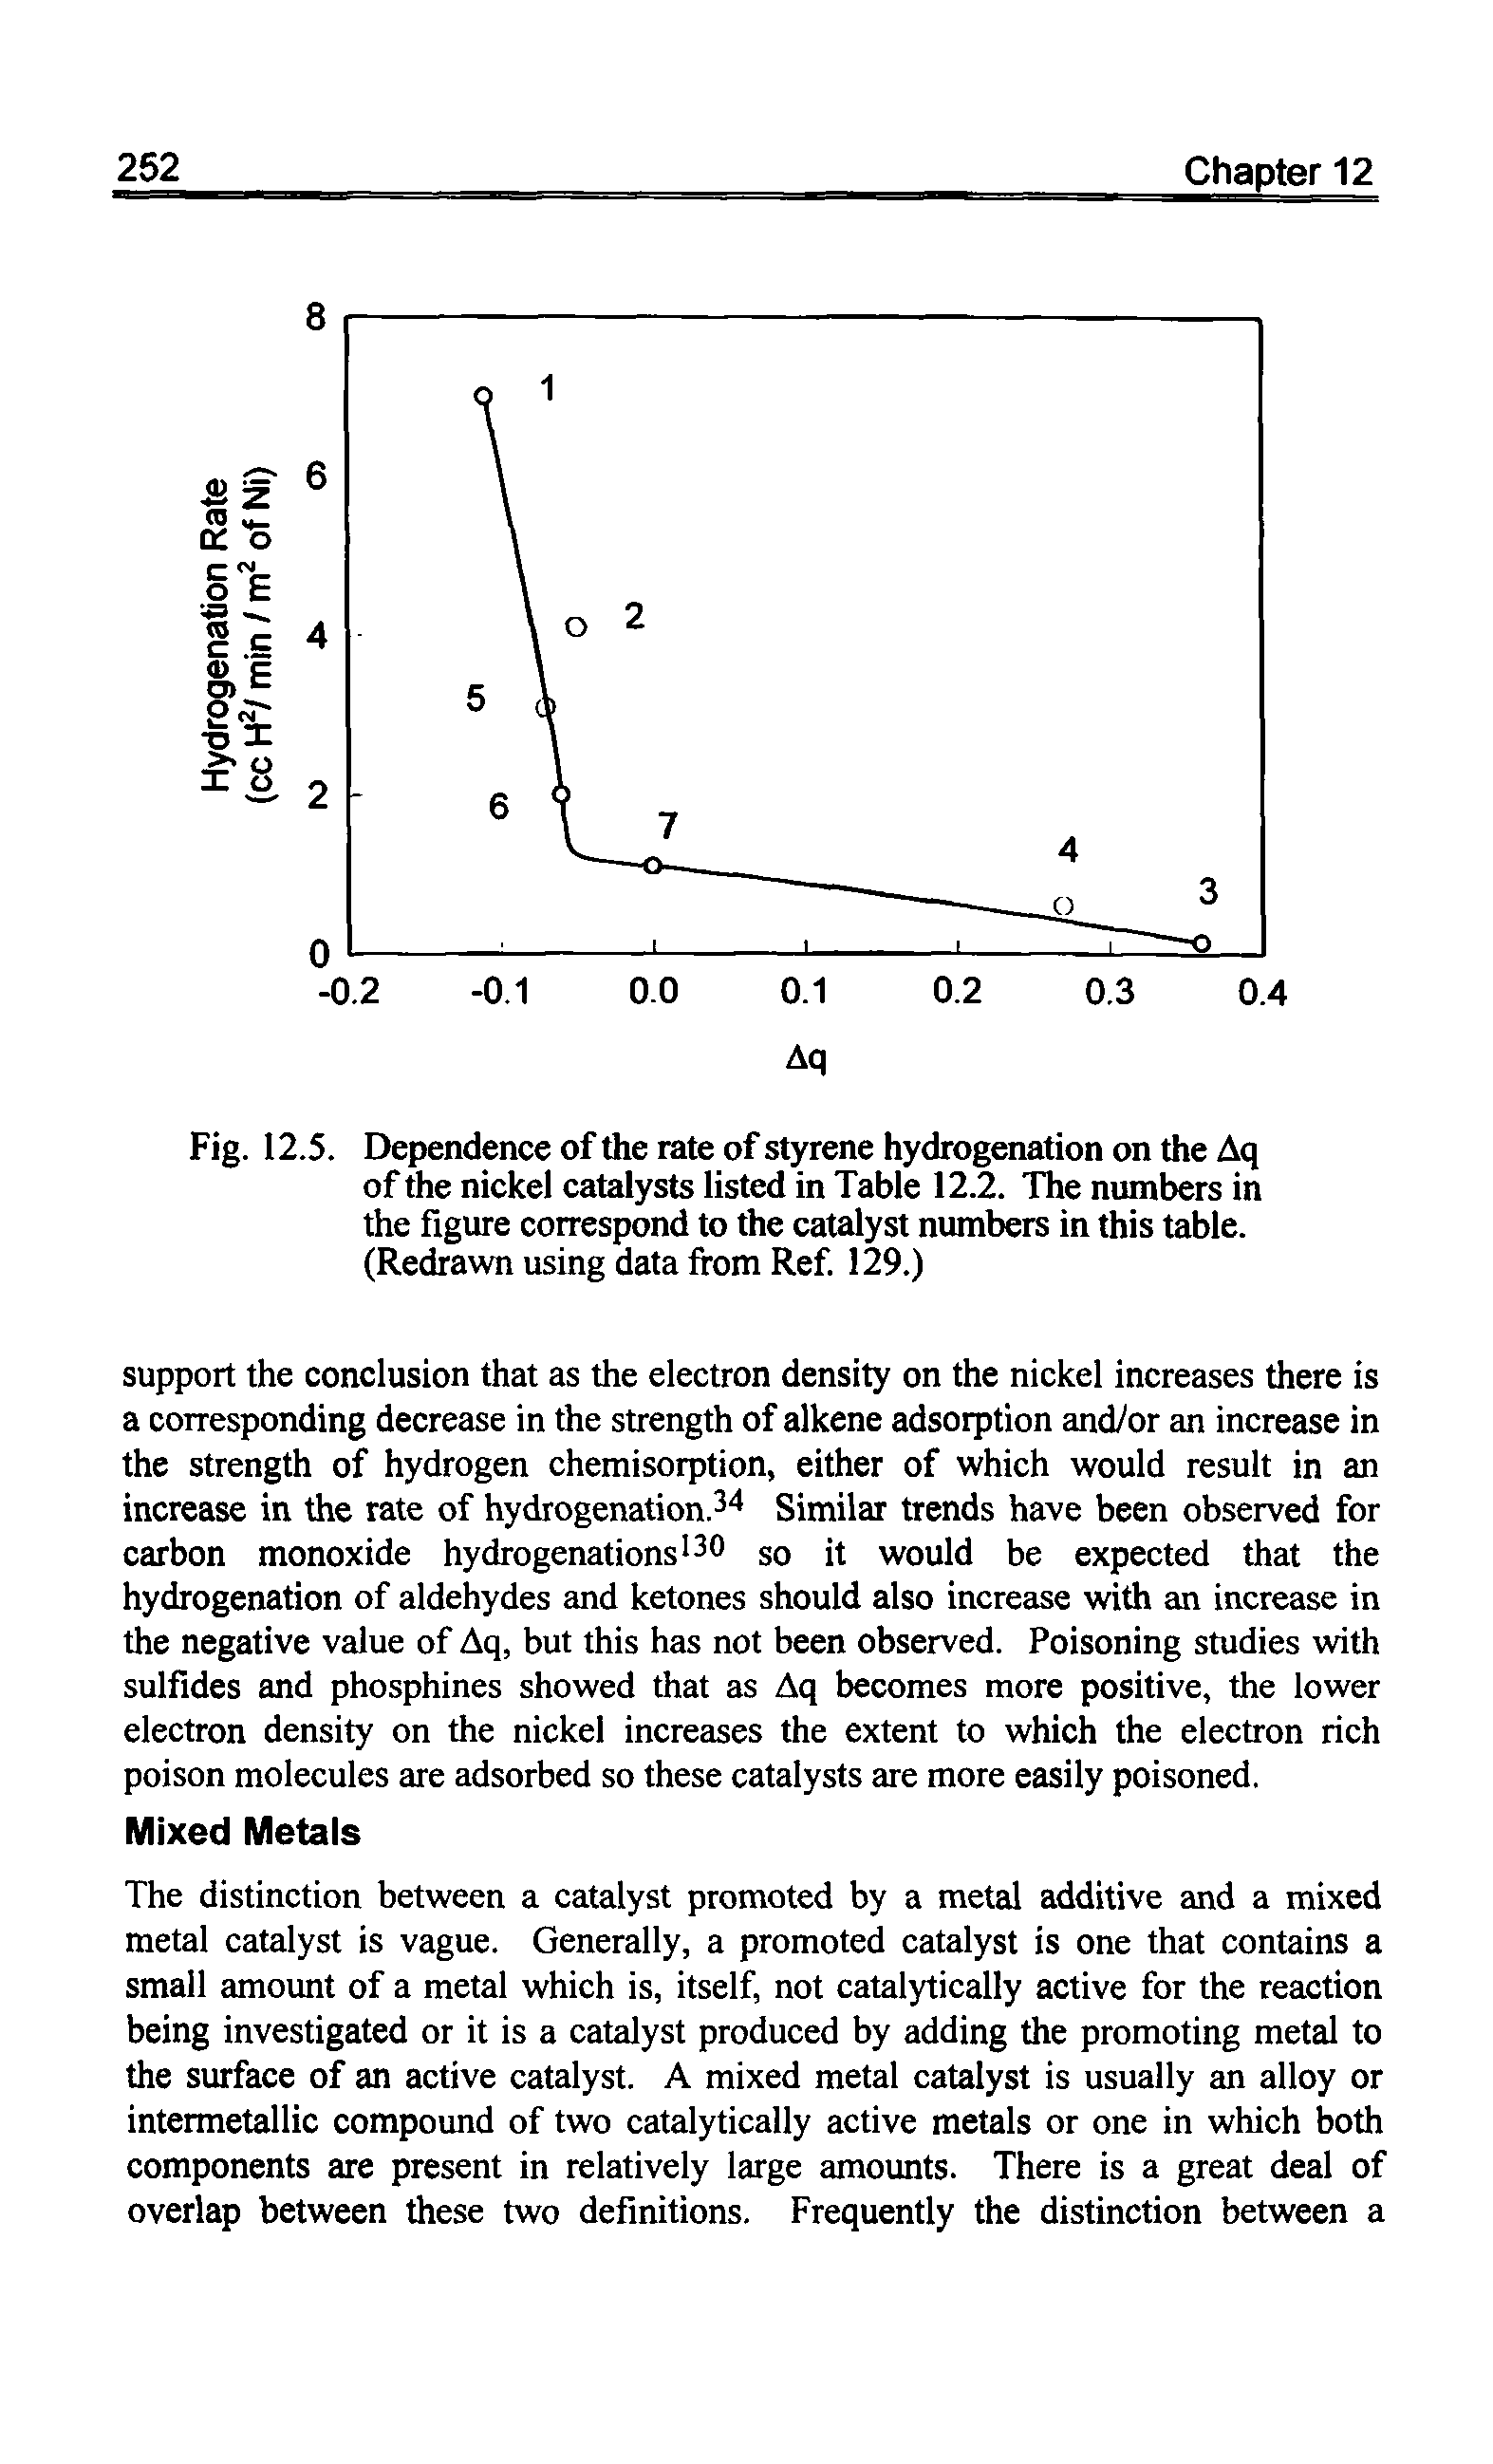 Fig. 12.5. Dependence of the rate of styrene hydrogenation on the Aq of the nickel catalysts listed in Table 12.2. The numbers in the figure correspond to the catalyst numbers in this table. (Redrawn using data from Ref. 129.)...